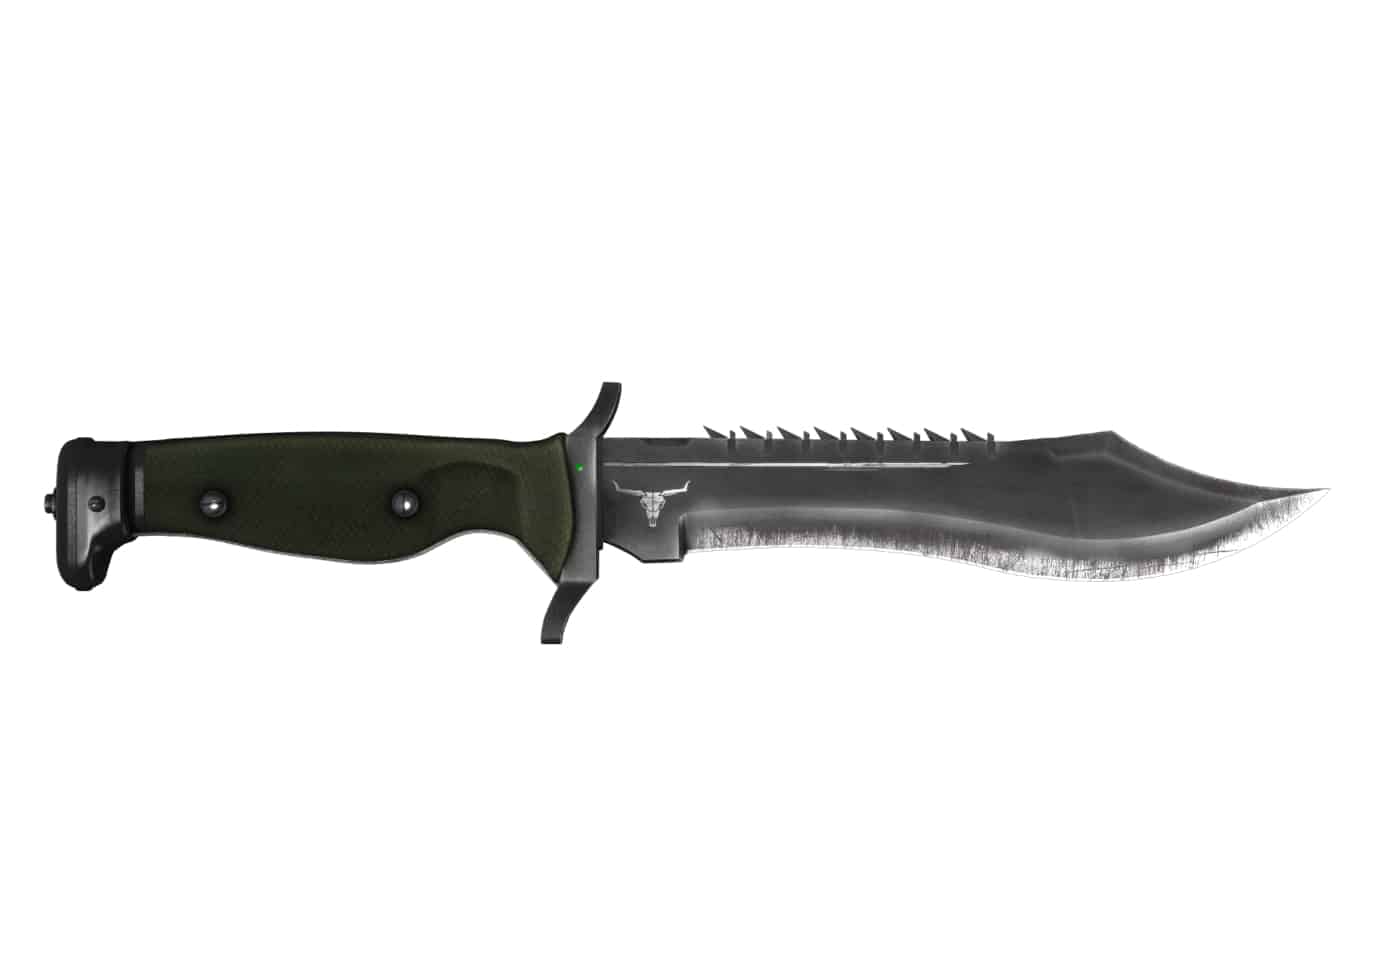 bowie knife in csgo